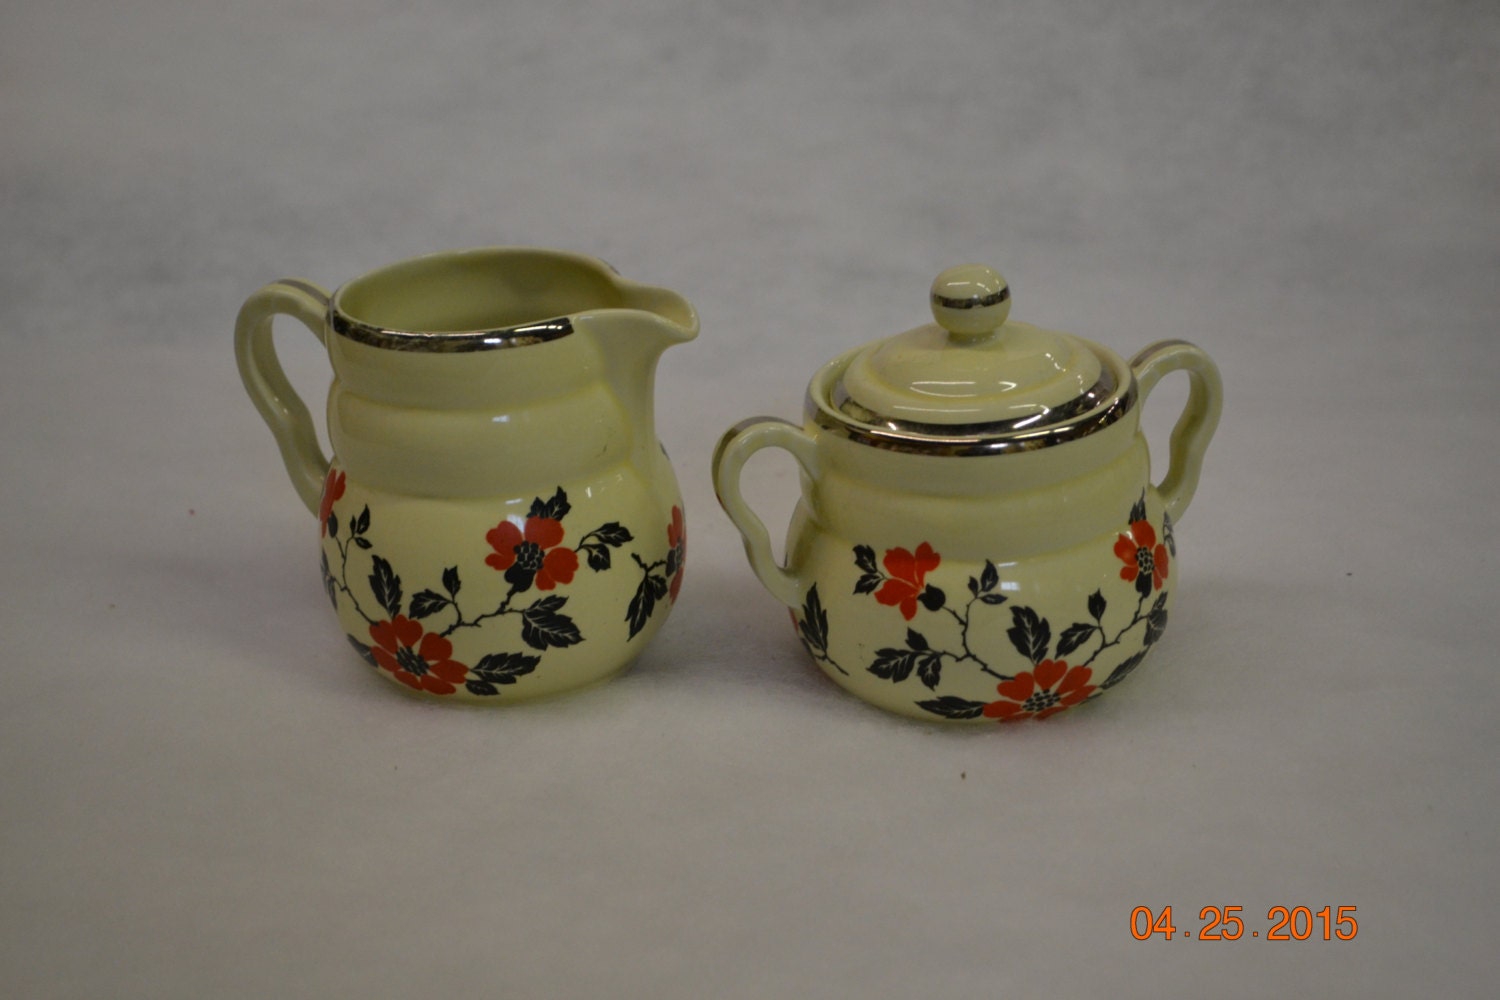 SALE Vintage Hall's Superior Quality Kitchenware Red